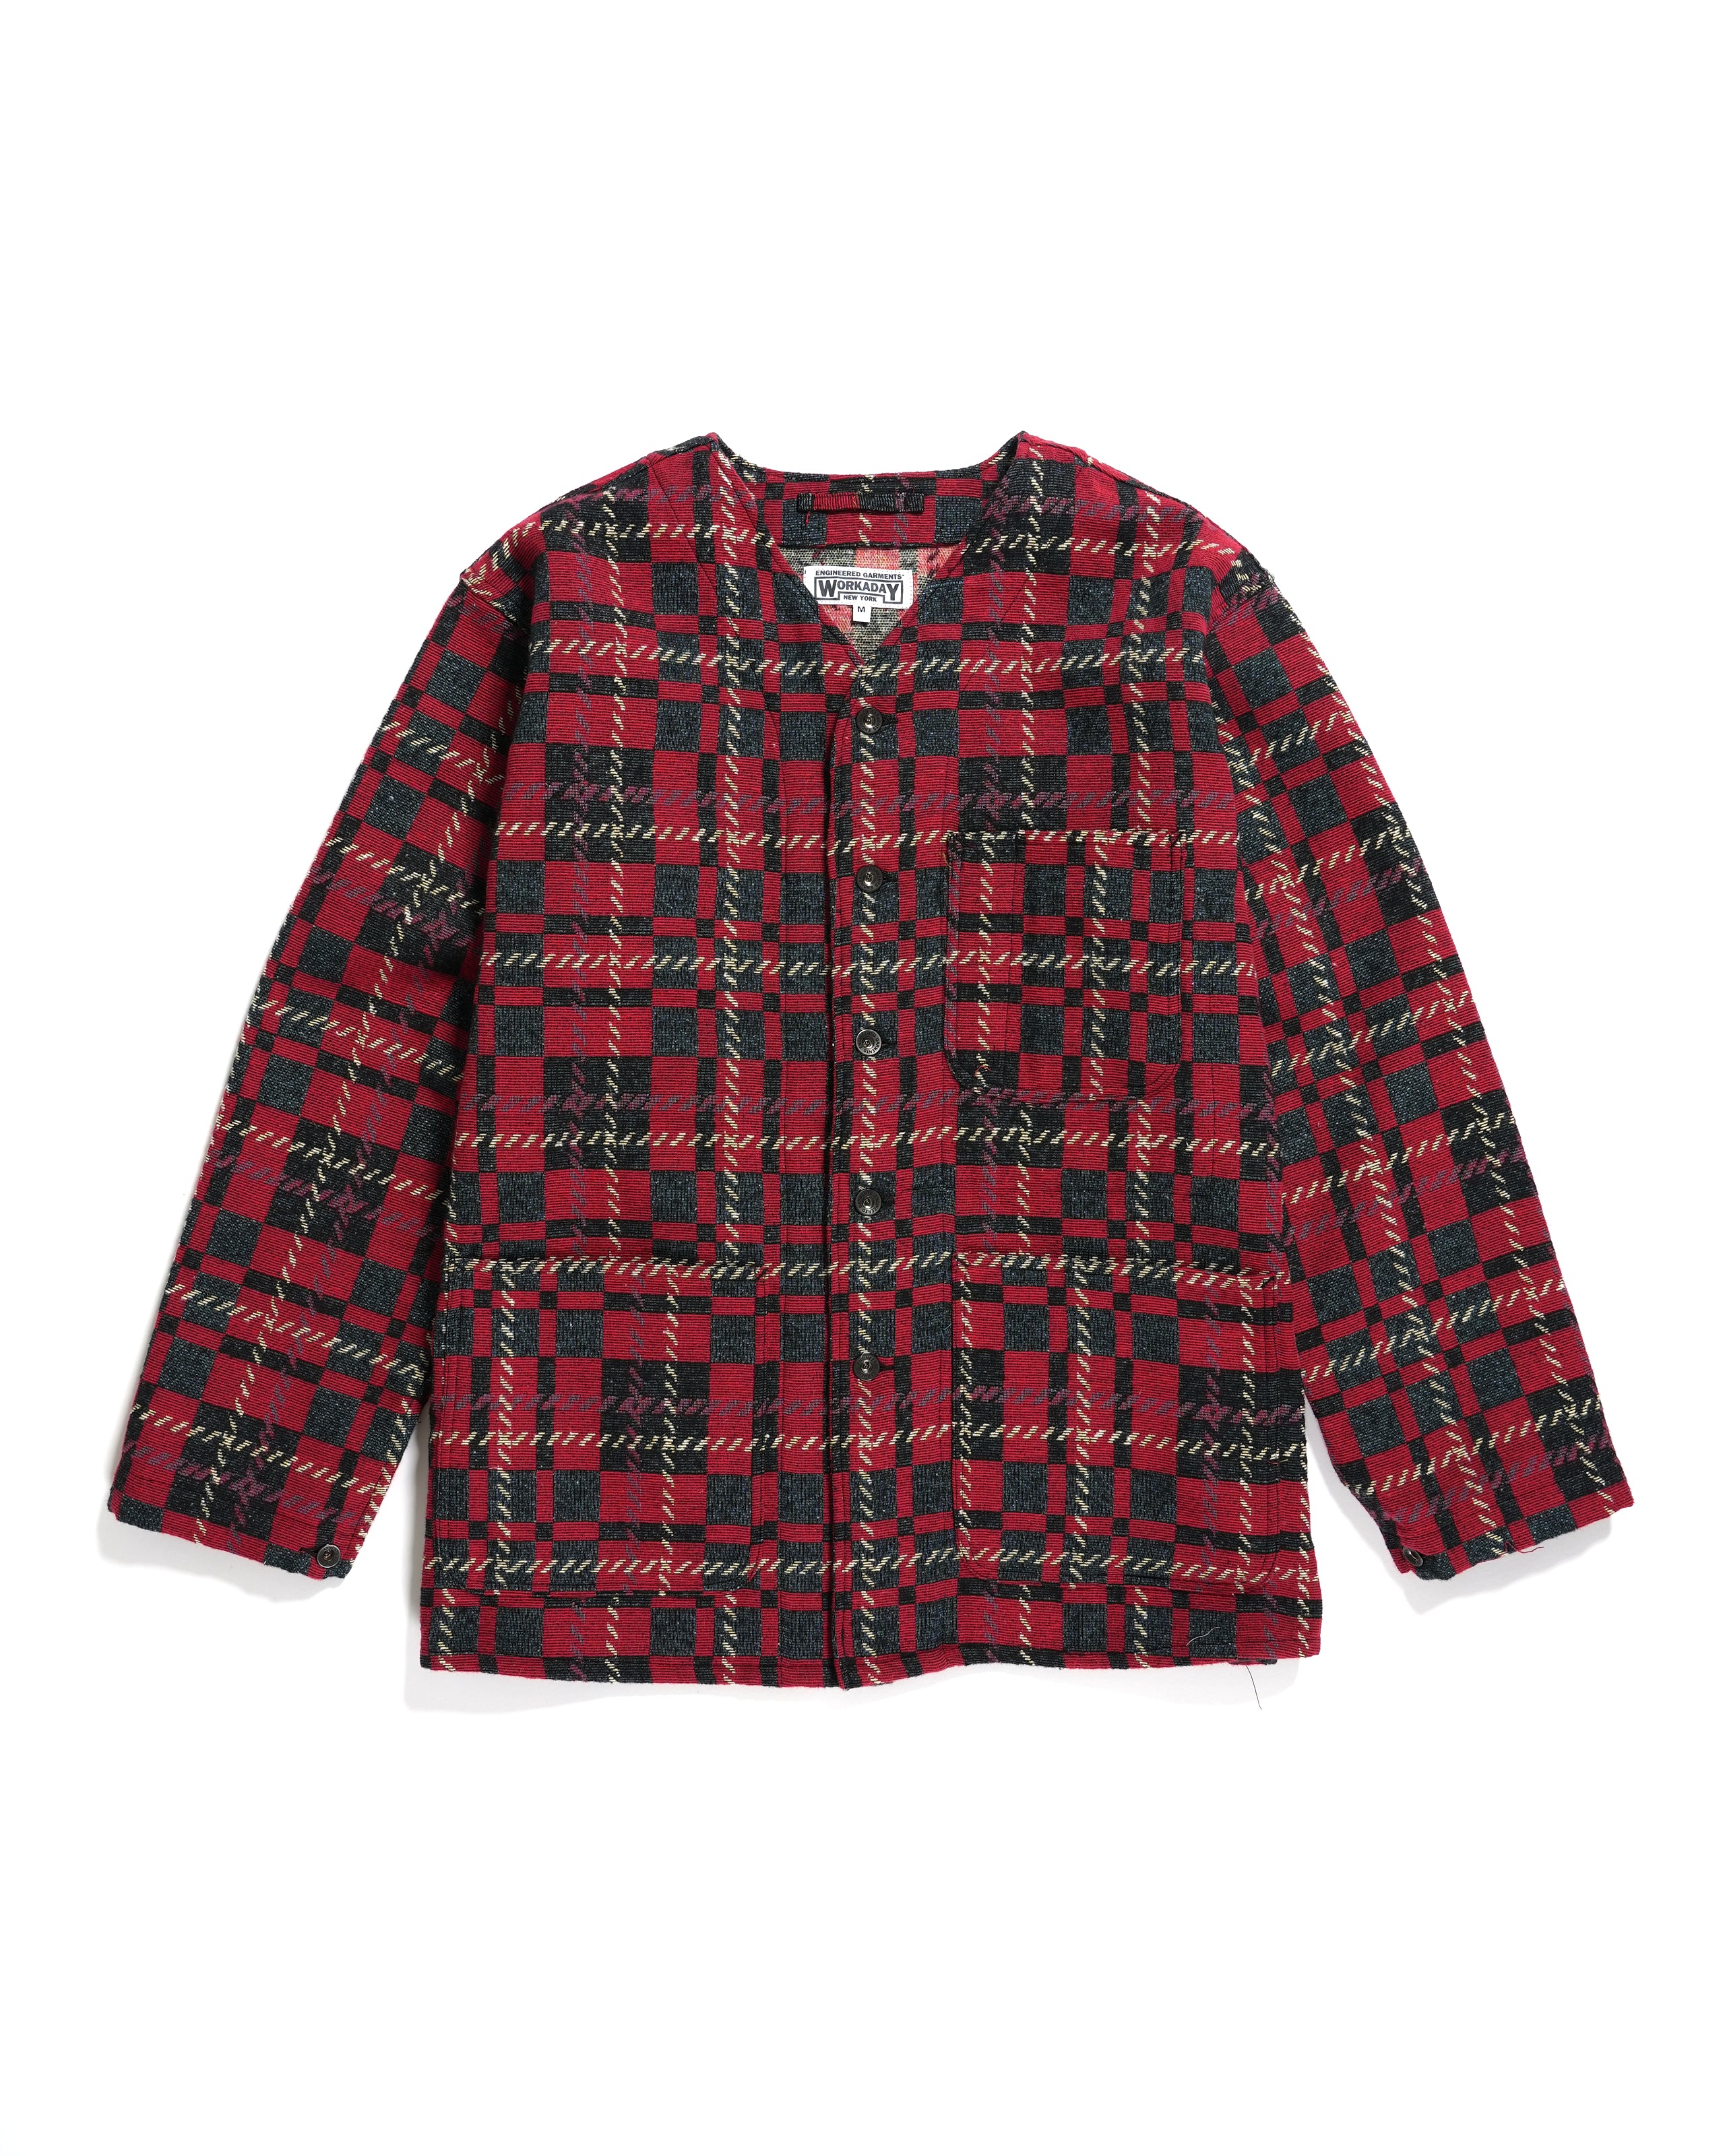 Engineer Jacket - Red / Charcoal Old Plaid Jacquard